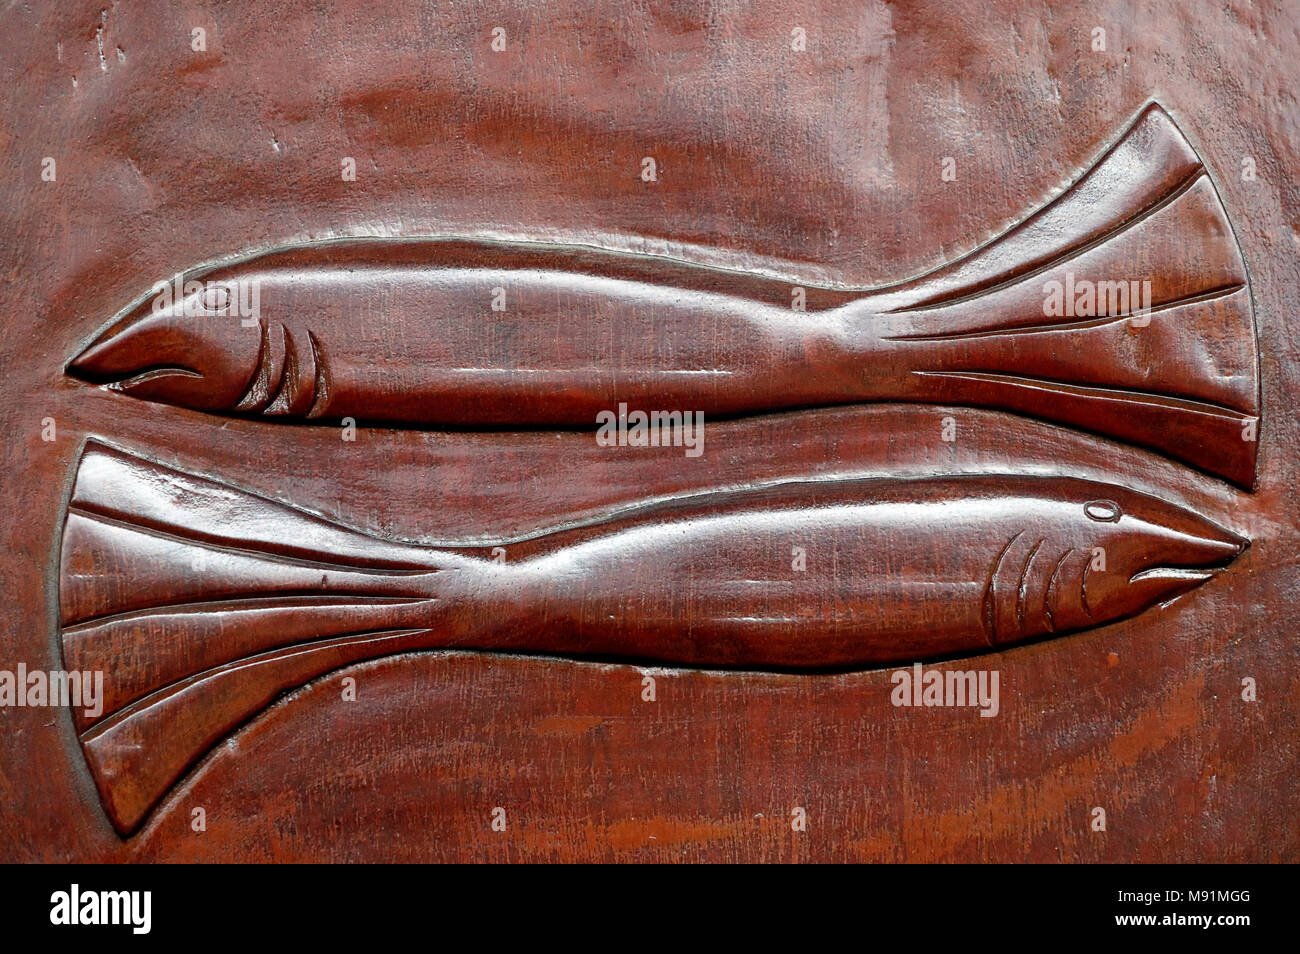 101,041 Two Fish Images, Stock Photos & Vectors | Shutterstock